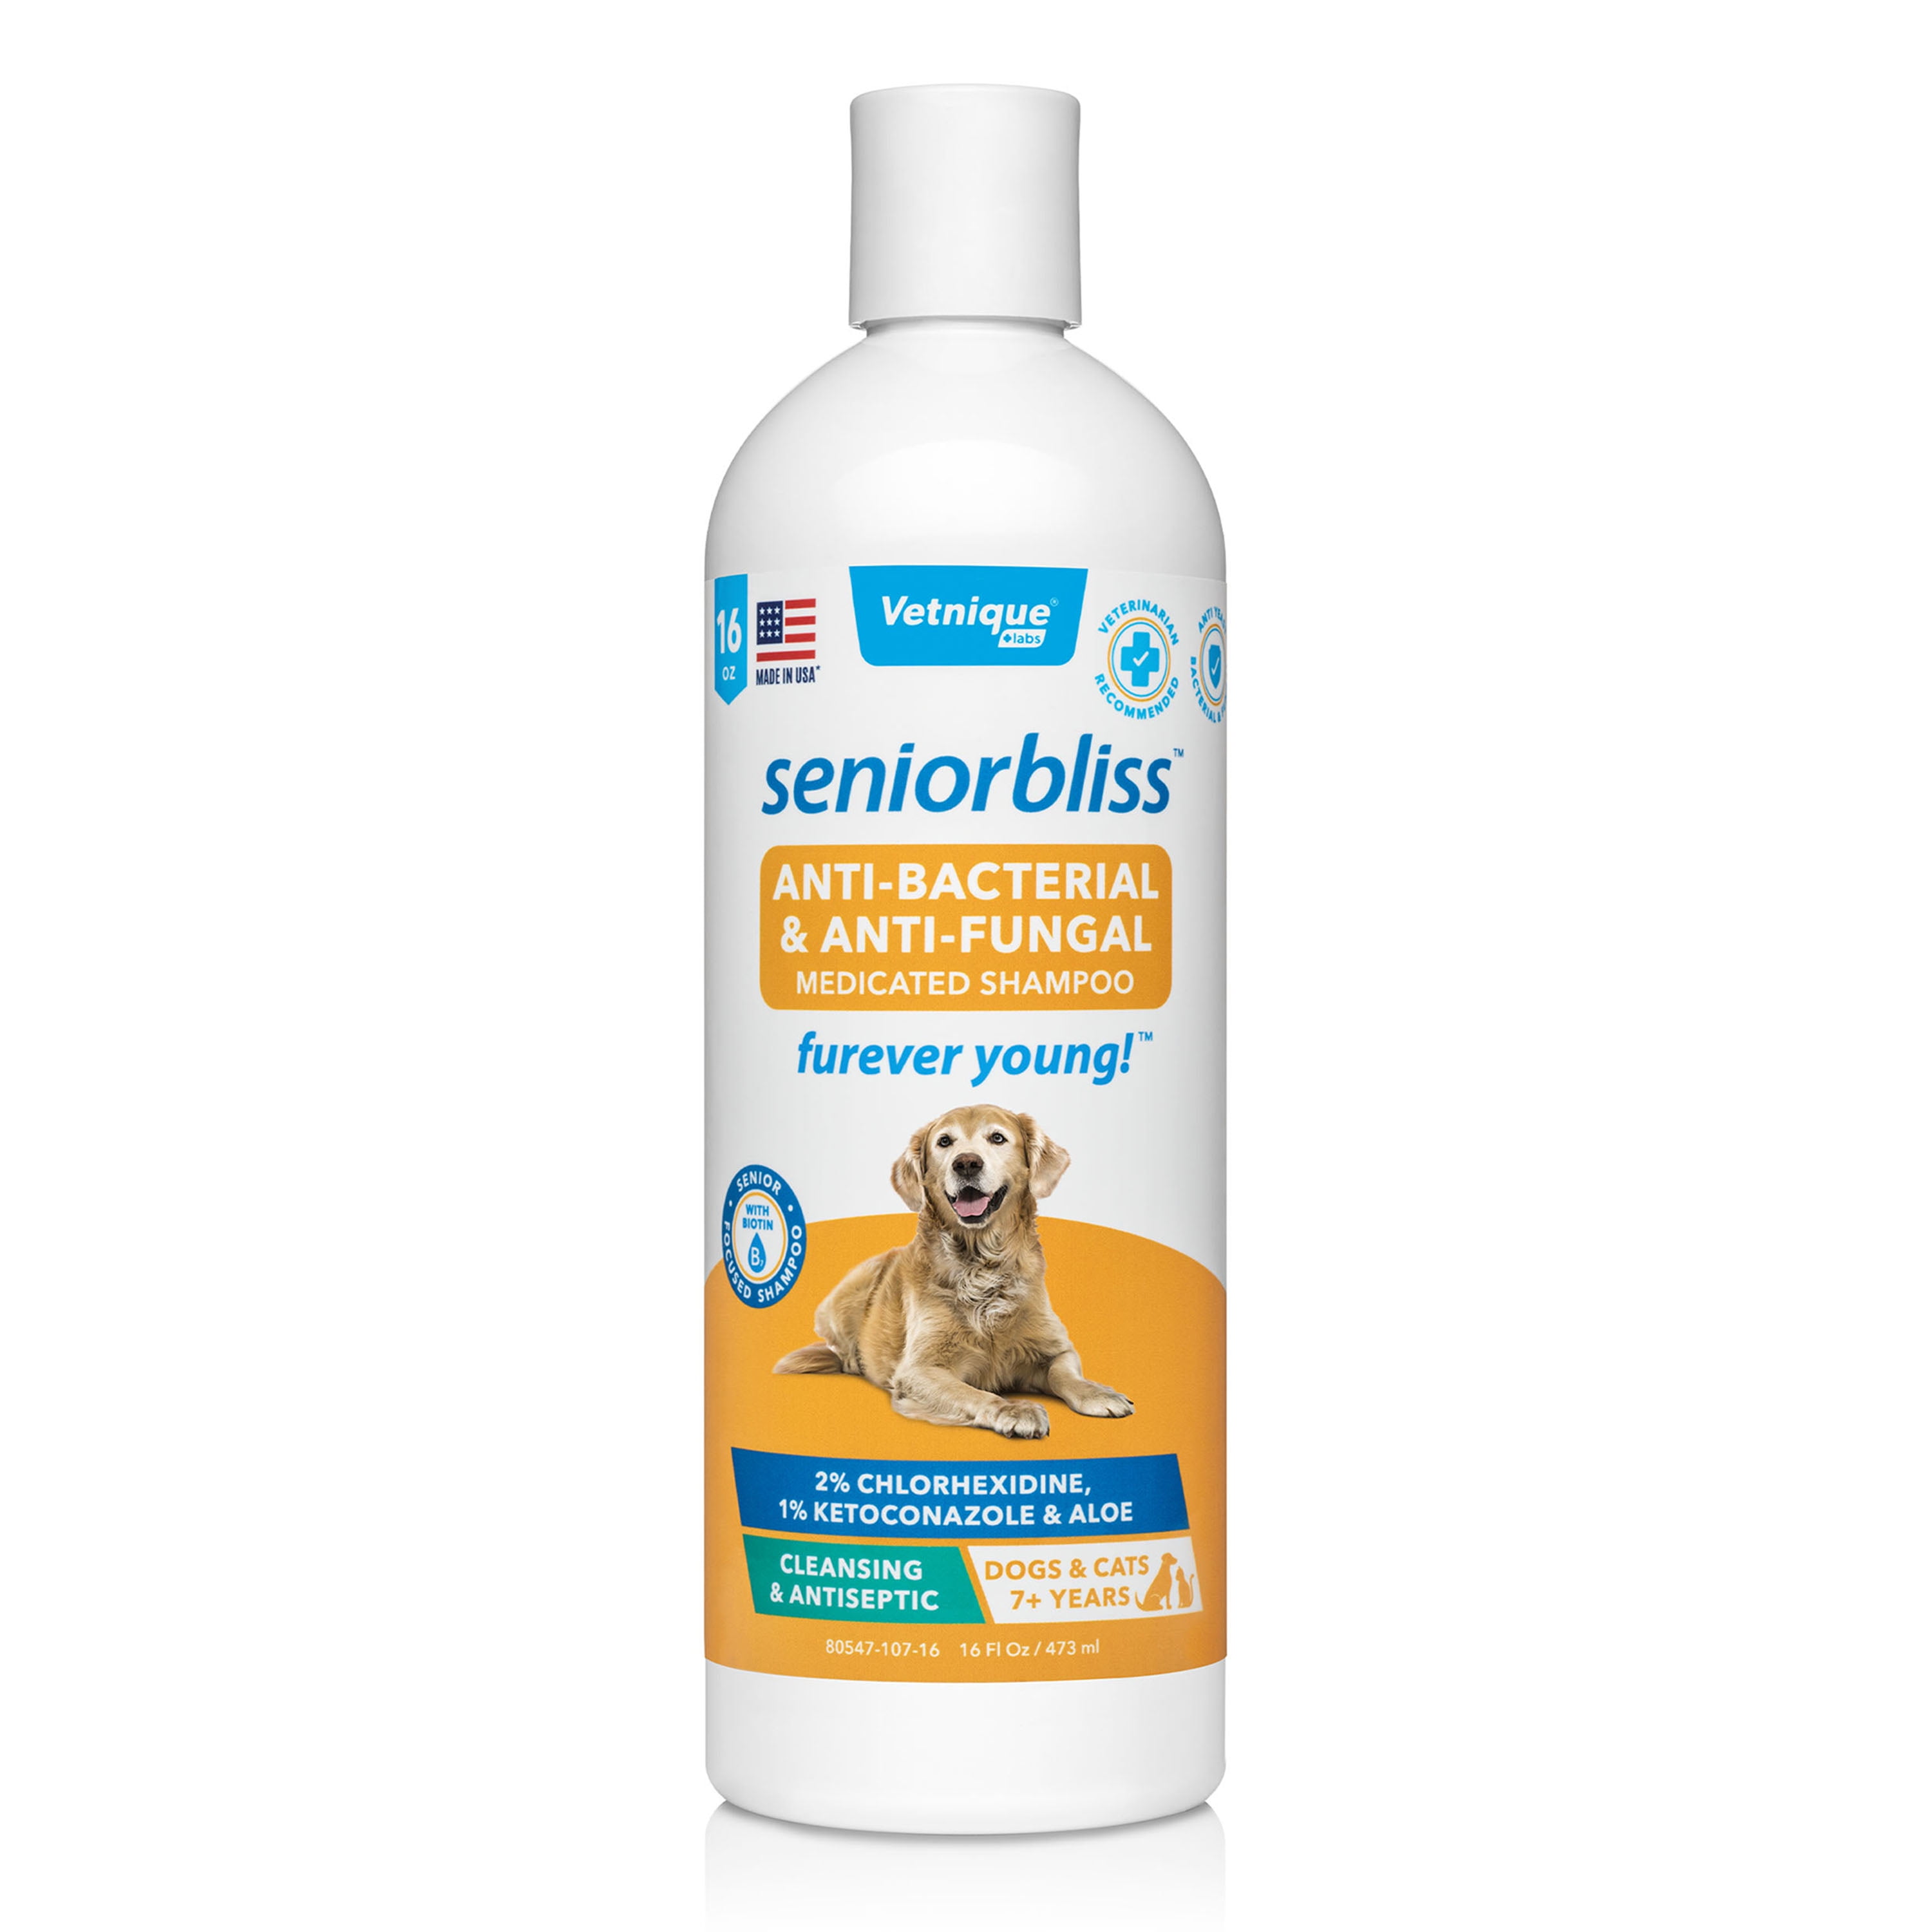 Seniorbliss Hypoallergenic Dog Shampoo for Aging Dogs with Sensitive Skin  by Vetnique Labs - 16oz 